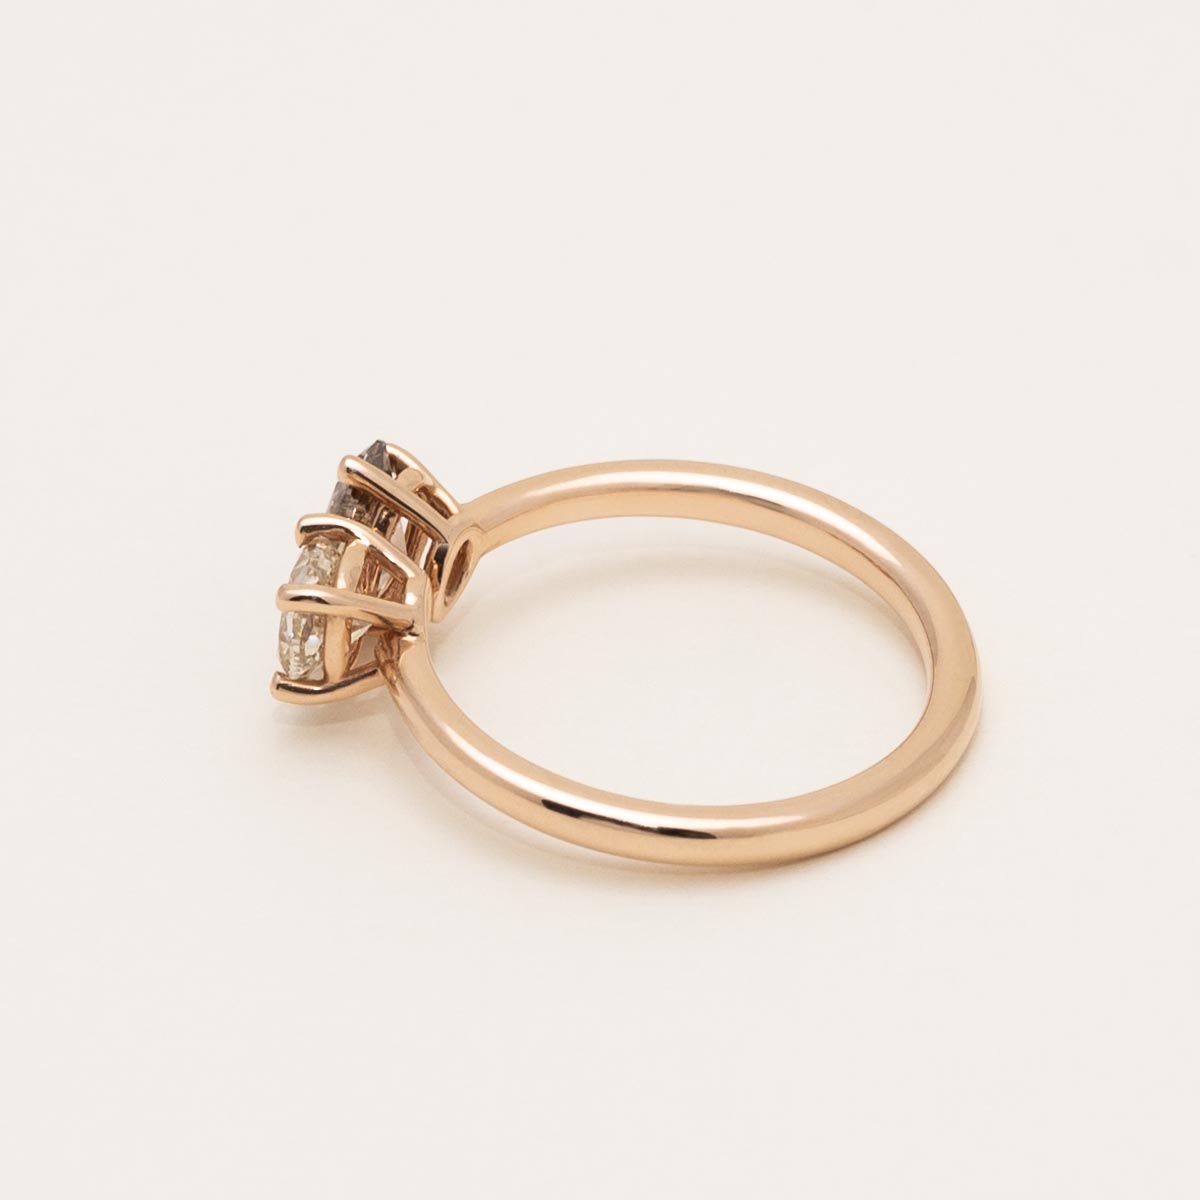 Champagne and White Diamond Toi et Moi Ring in 14kt Rose Gold (1 1/4ct tw)